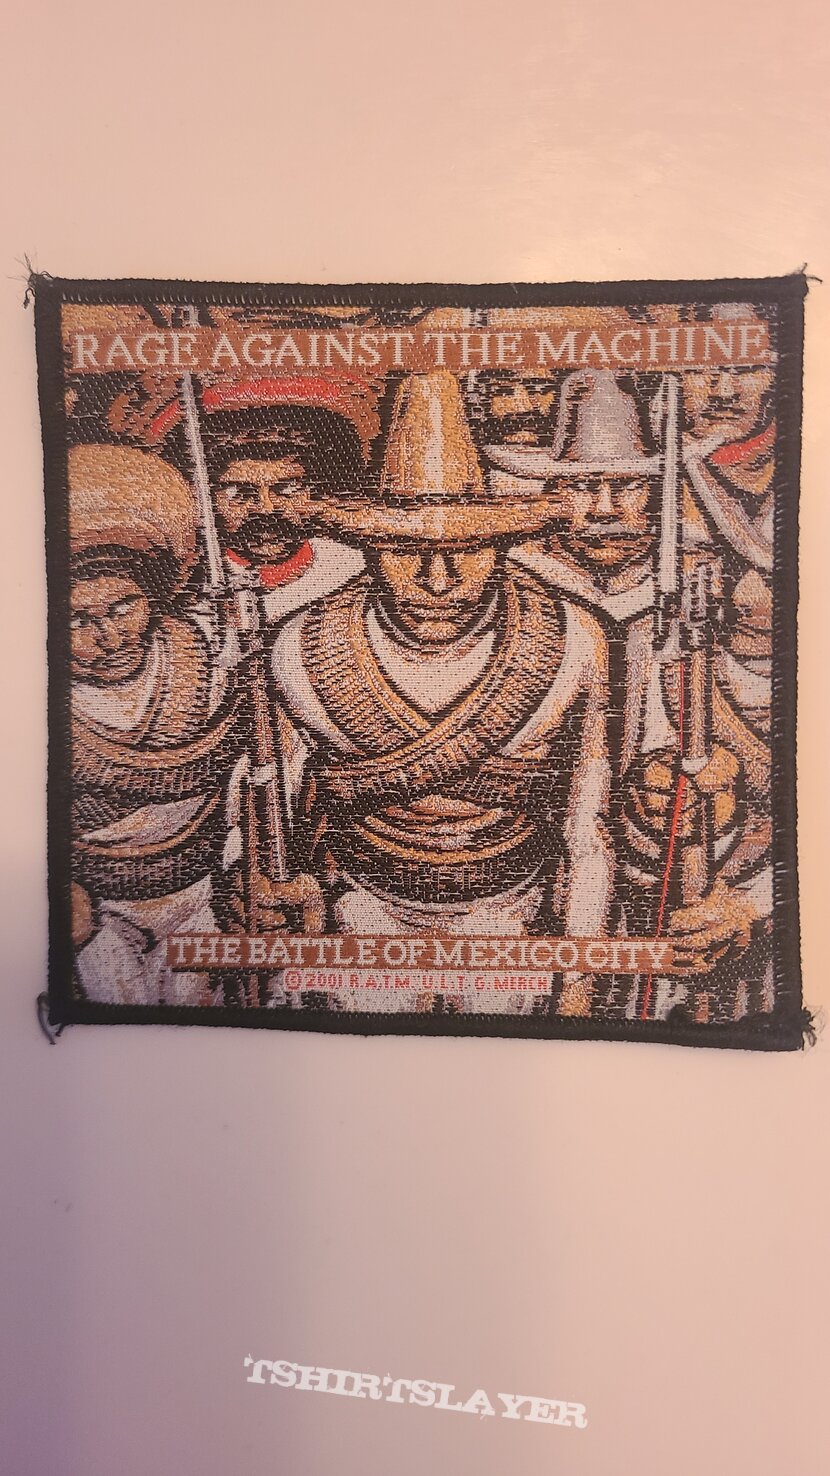 Rage against the machine patch